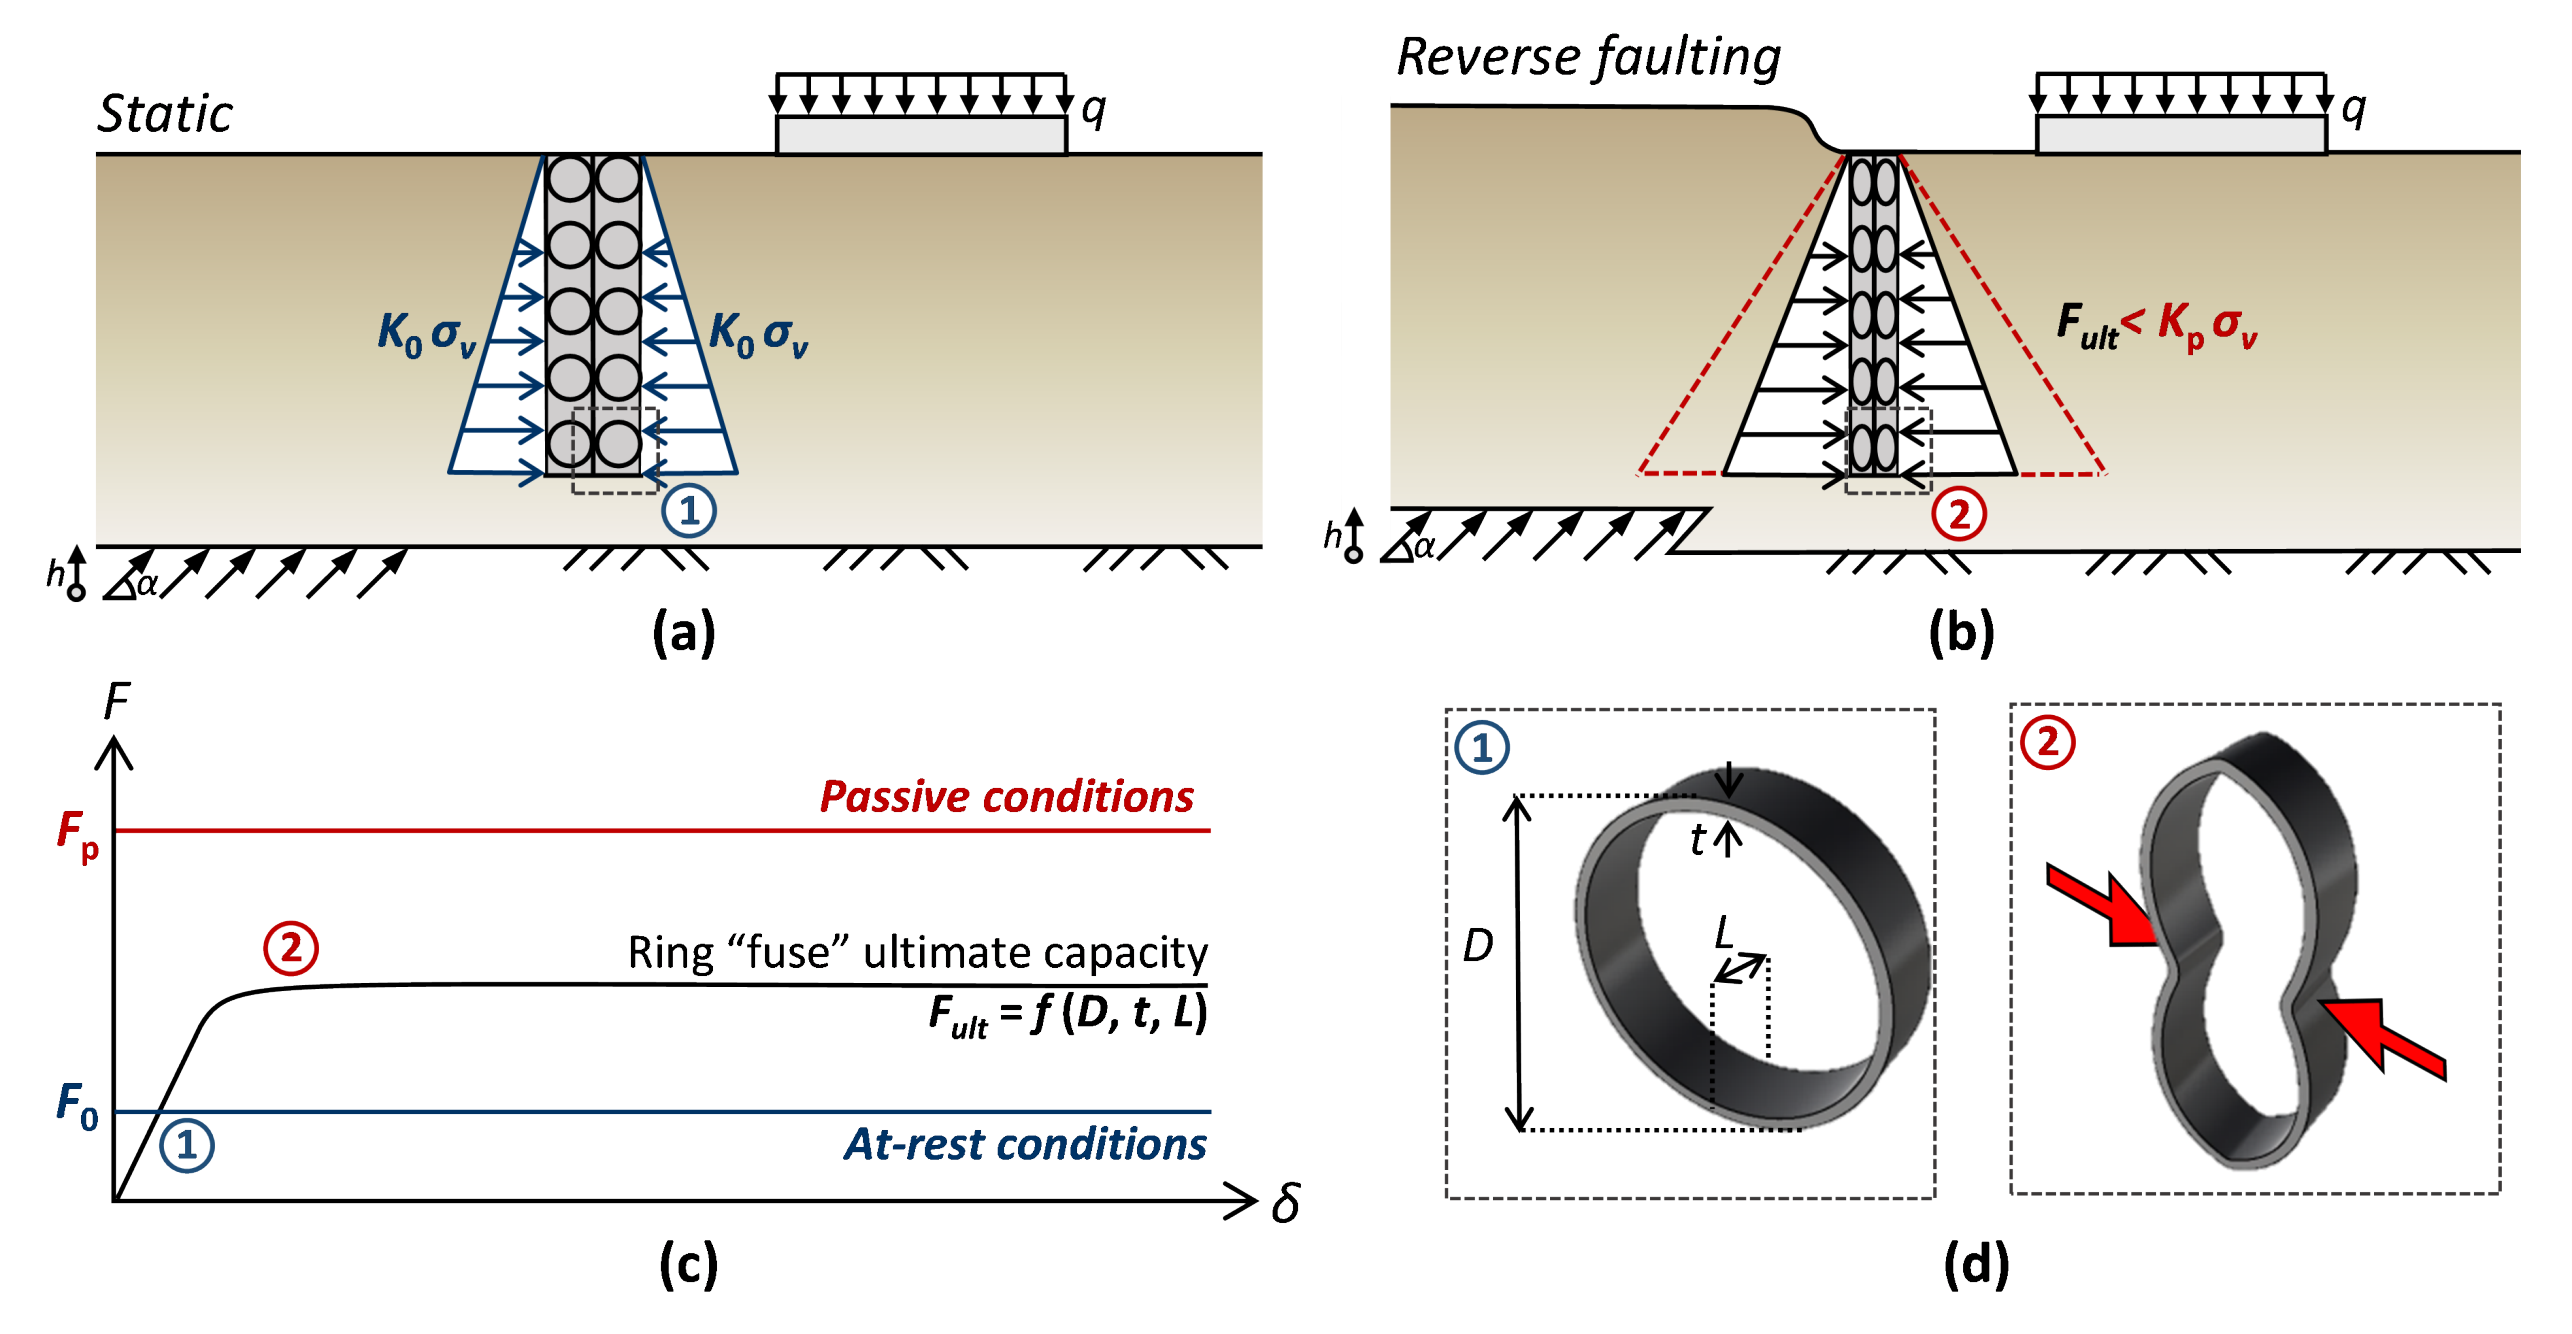 “Smart” wall barrier concept: (a) before faulting, in-situ earth pressures; (b) subjected to reverse faulting, towards passive earth pressures; (c) force-displacement response of a ring-fuse; (d) dimensions and illustration of its compressive failure